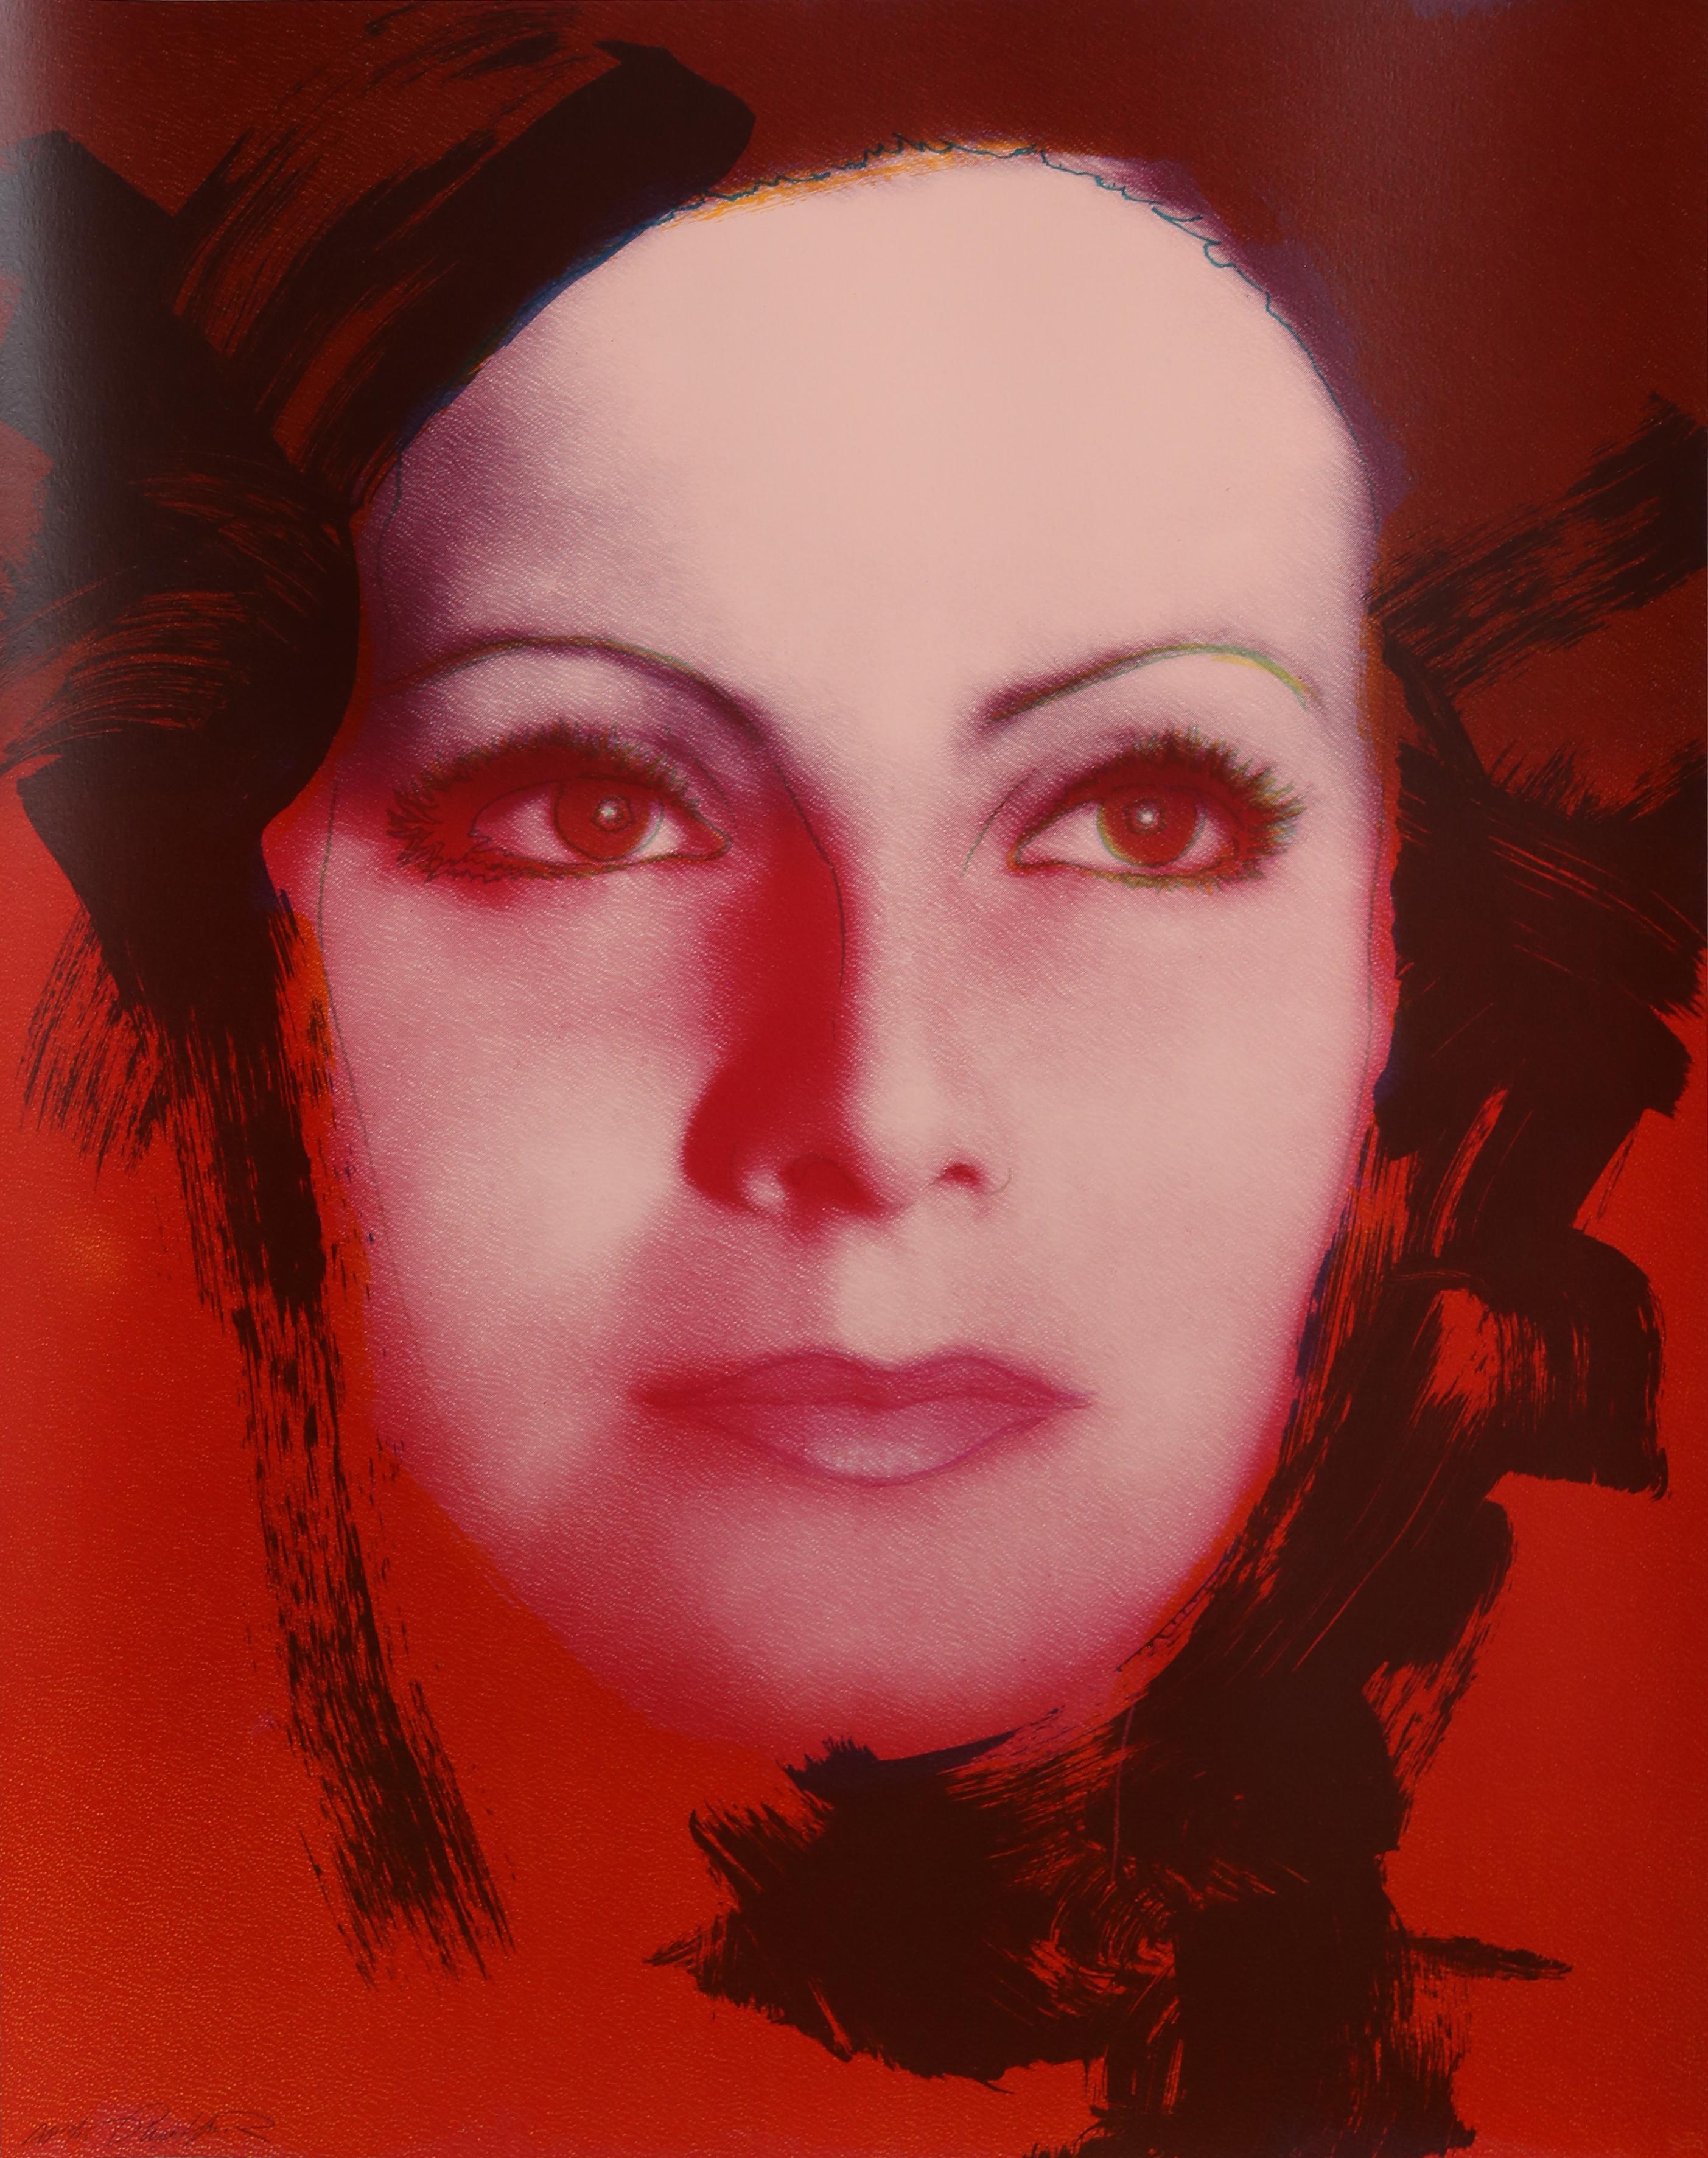 Artist: Rupert Jasen Smith, American (1953 - 1989)
Title:	Greta Garbo
Year: 1988
Medium:	Screenprint, signed and numbered in pencil
Edition: AP 12/15
Size:	43 x 34 in. (109.22 x 86.36 cm)

Printer: Rupert Jasen Smith
Publisher: Galerie Borjeson,